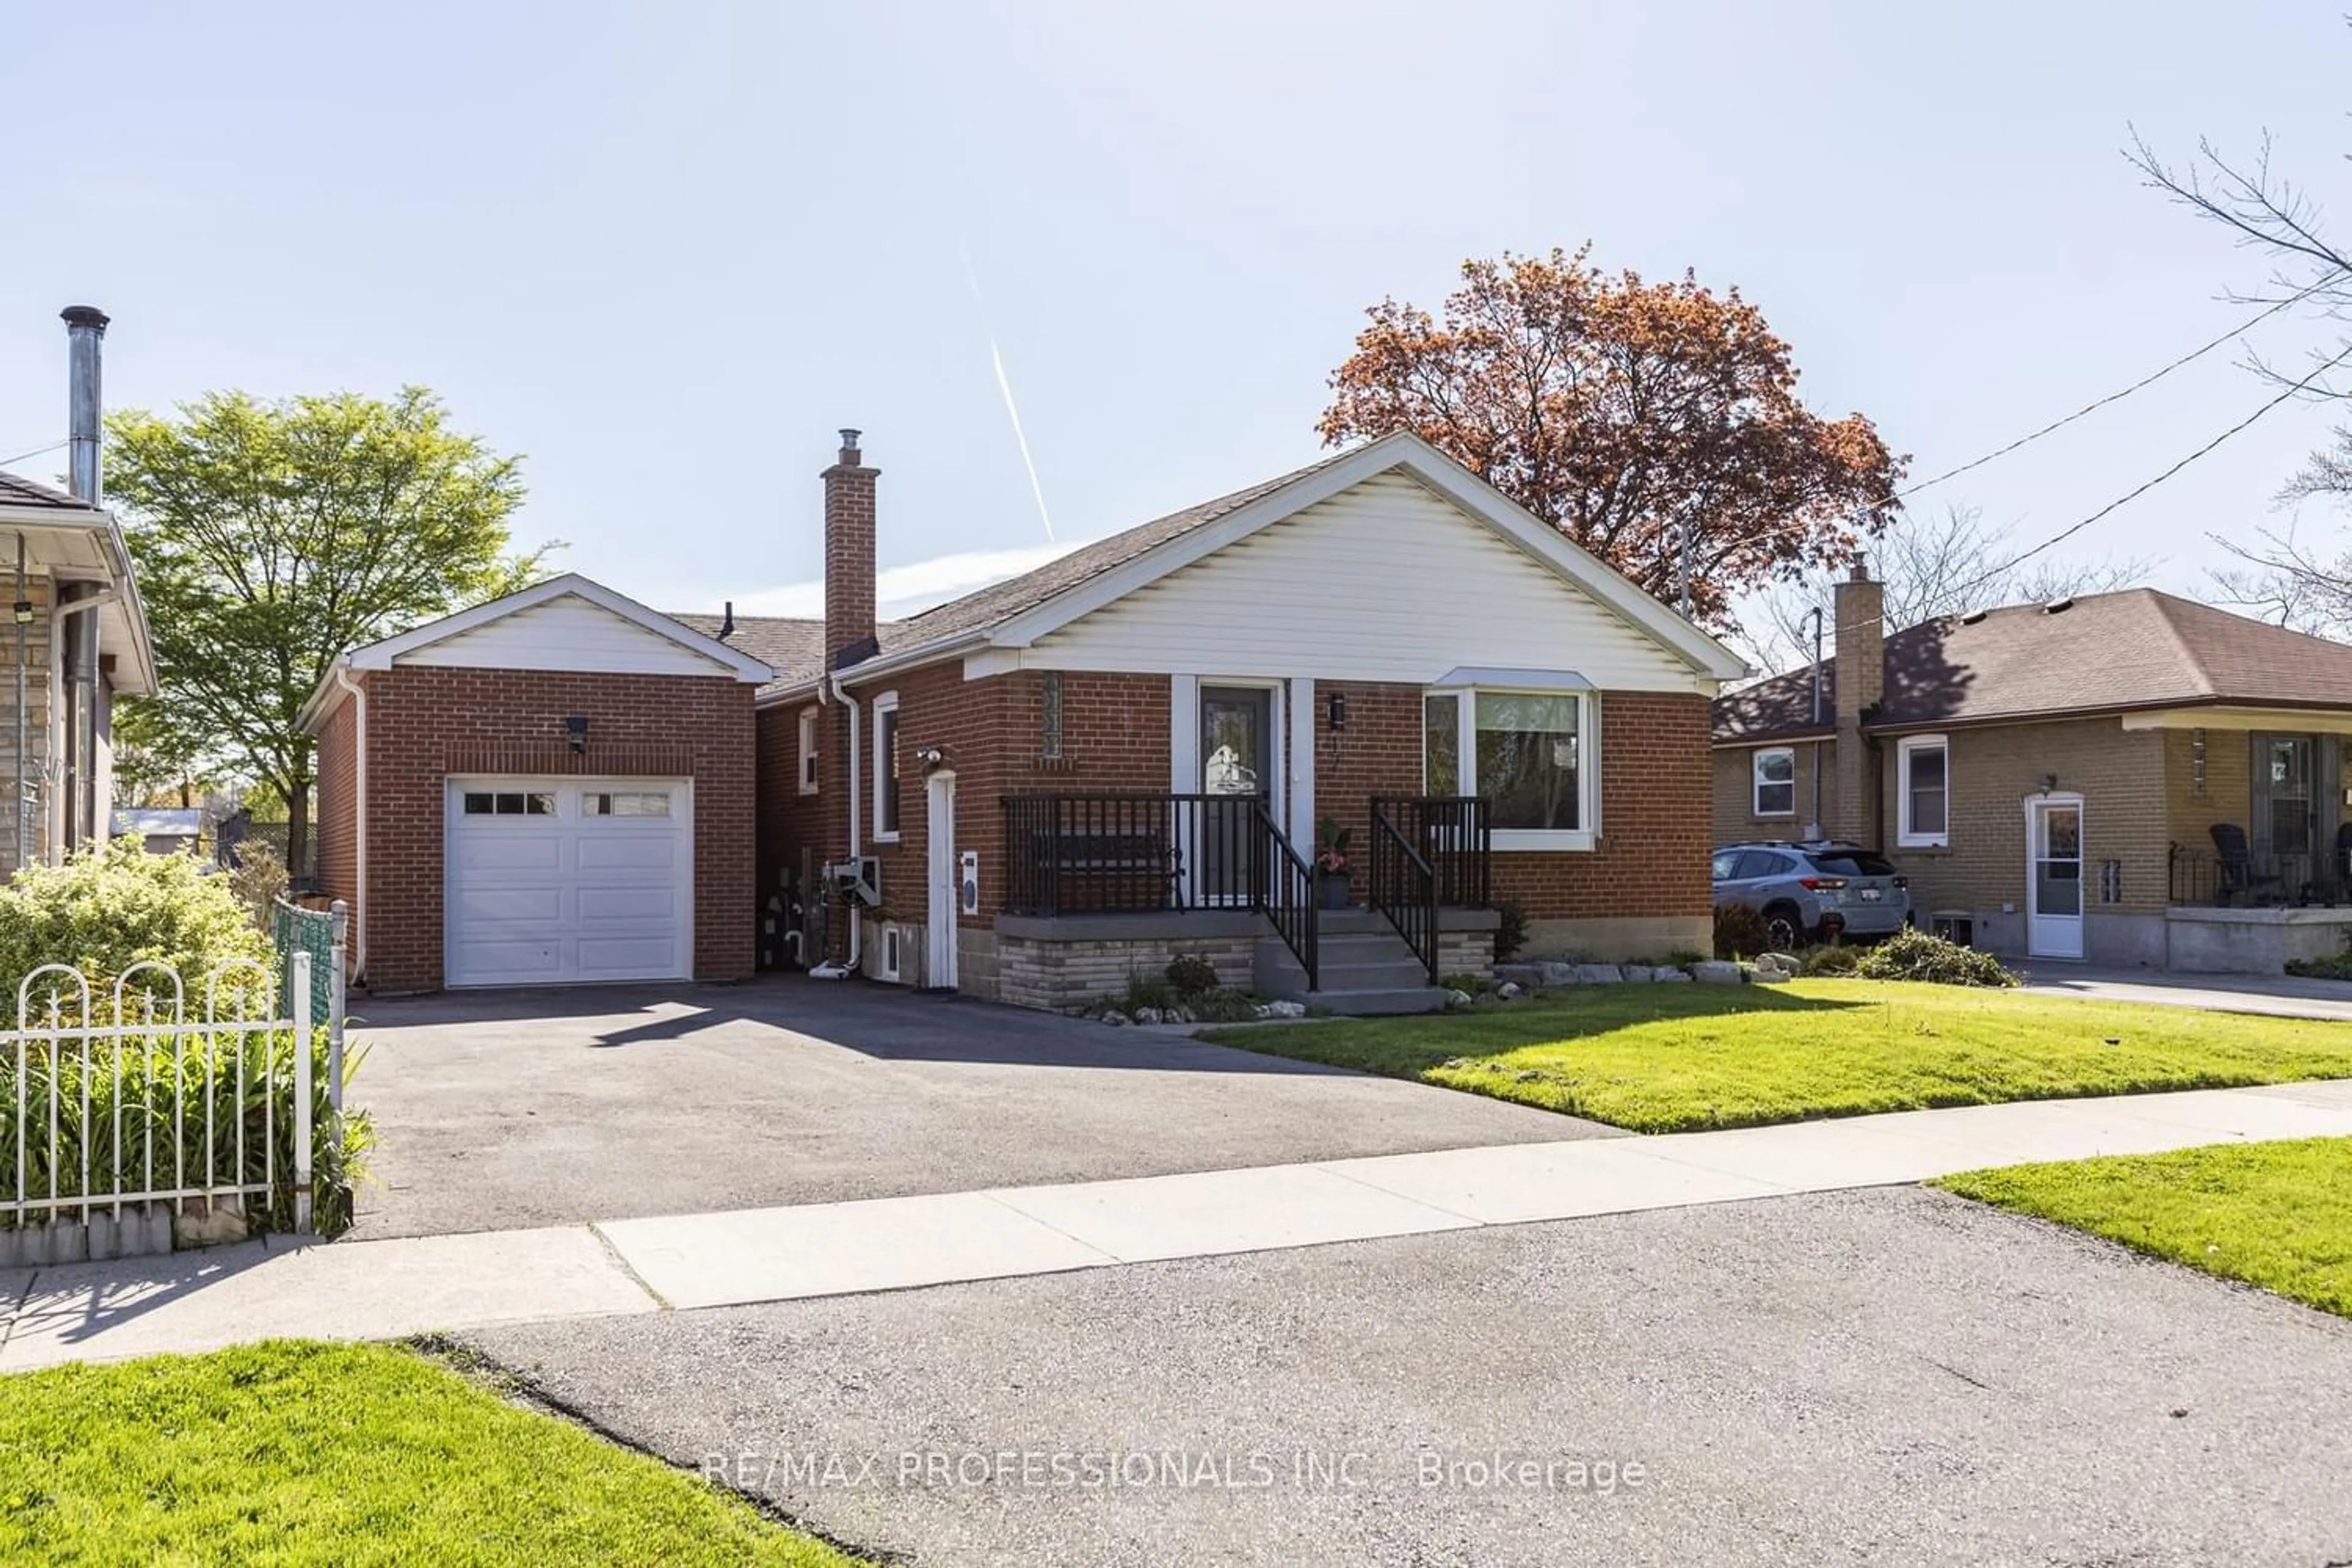 Home with brick exterior material for 17 Delma Dr, Toronto Ontario M8W 4N3